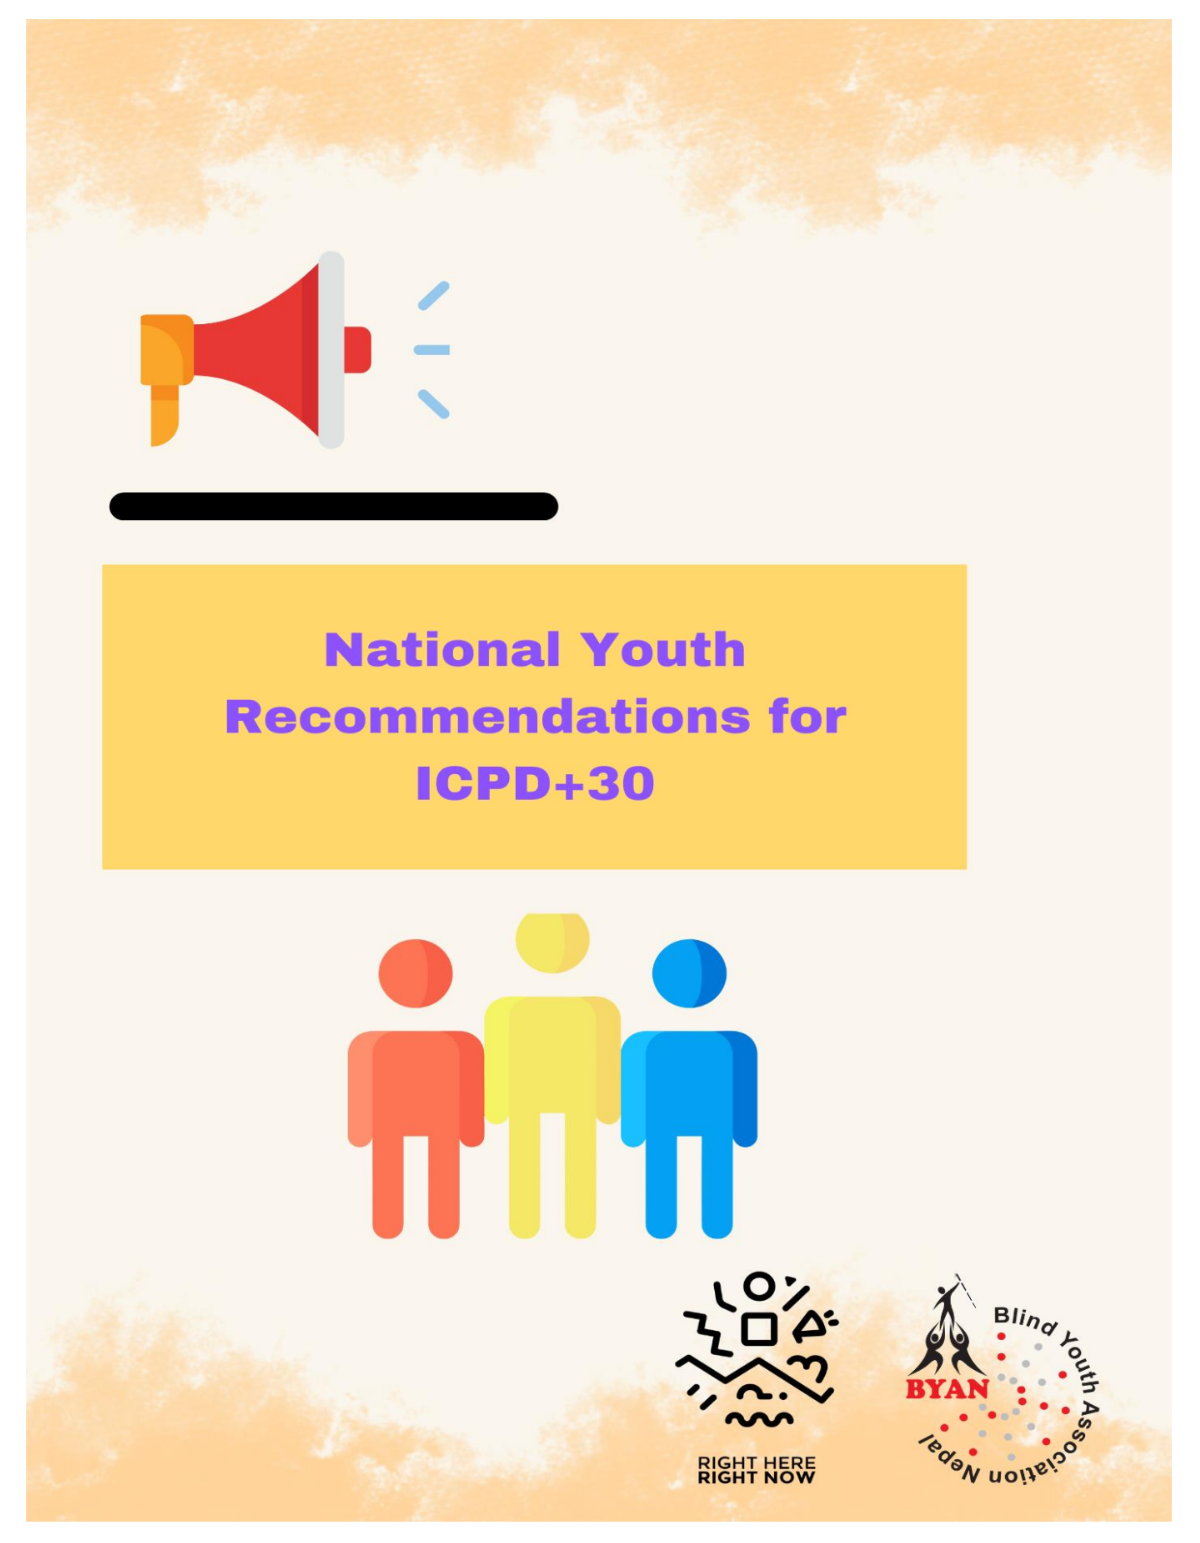 National Youth Recommendations for ICPD+30